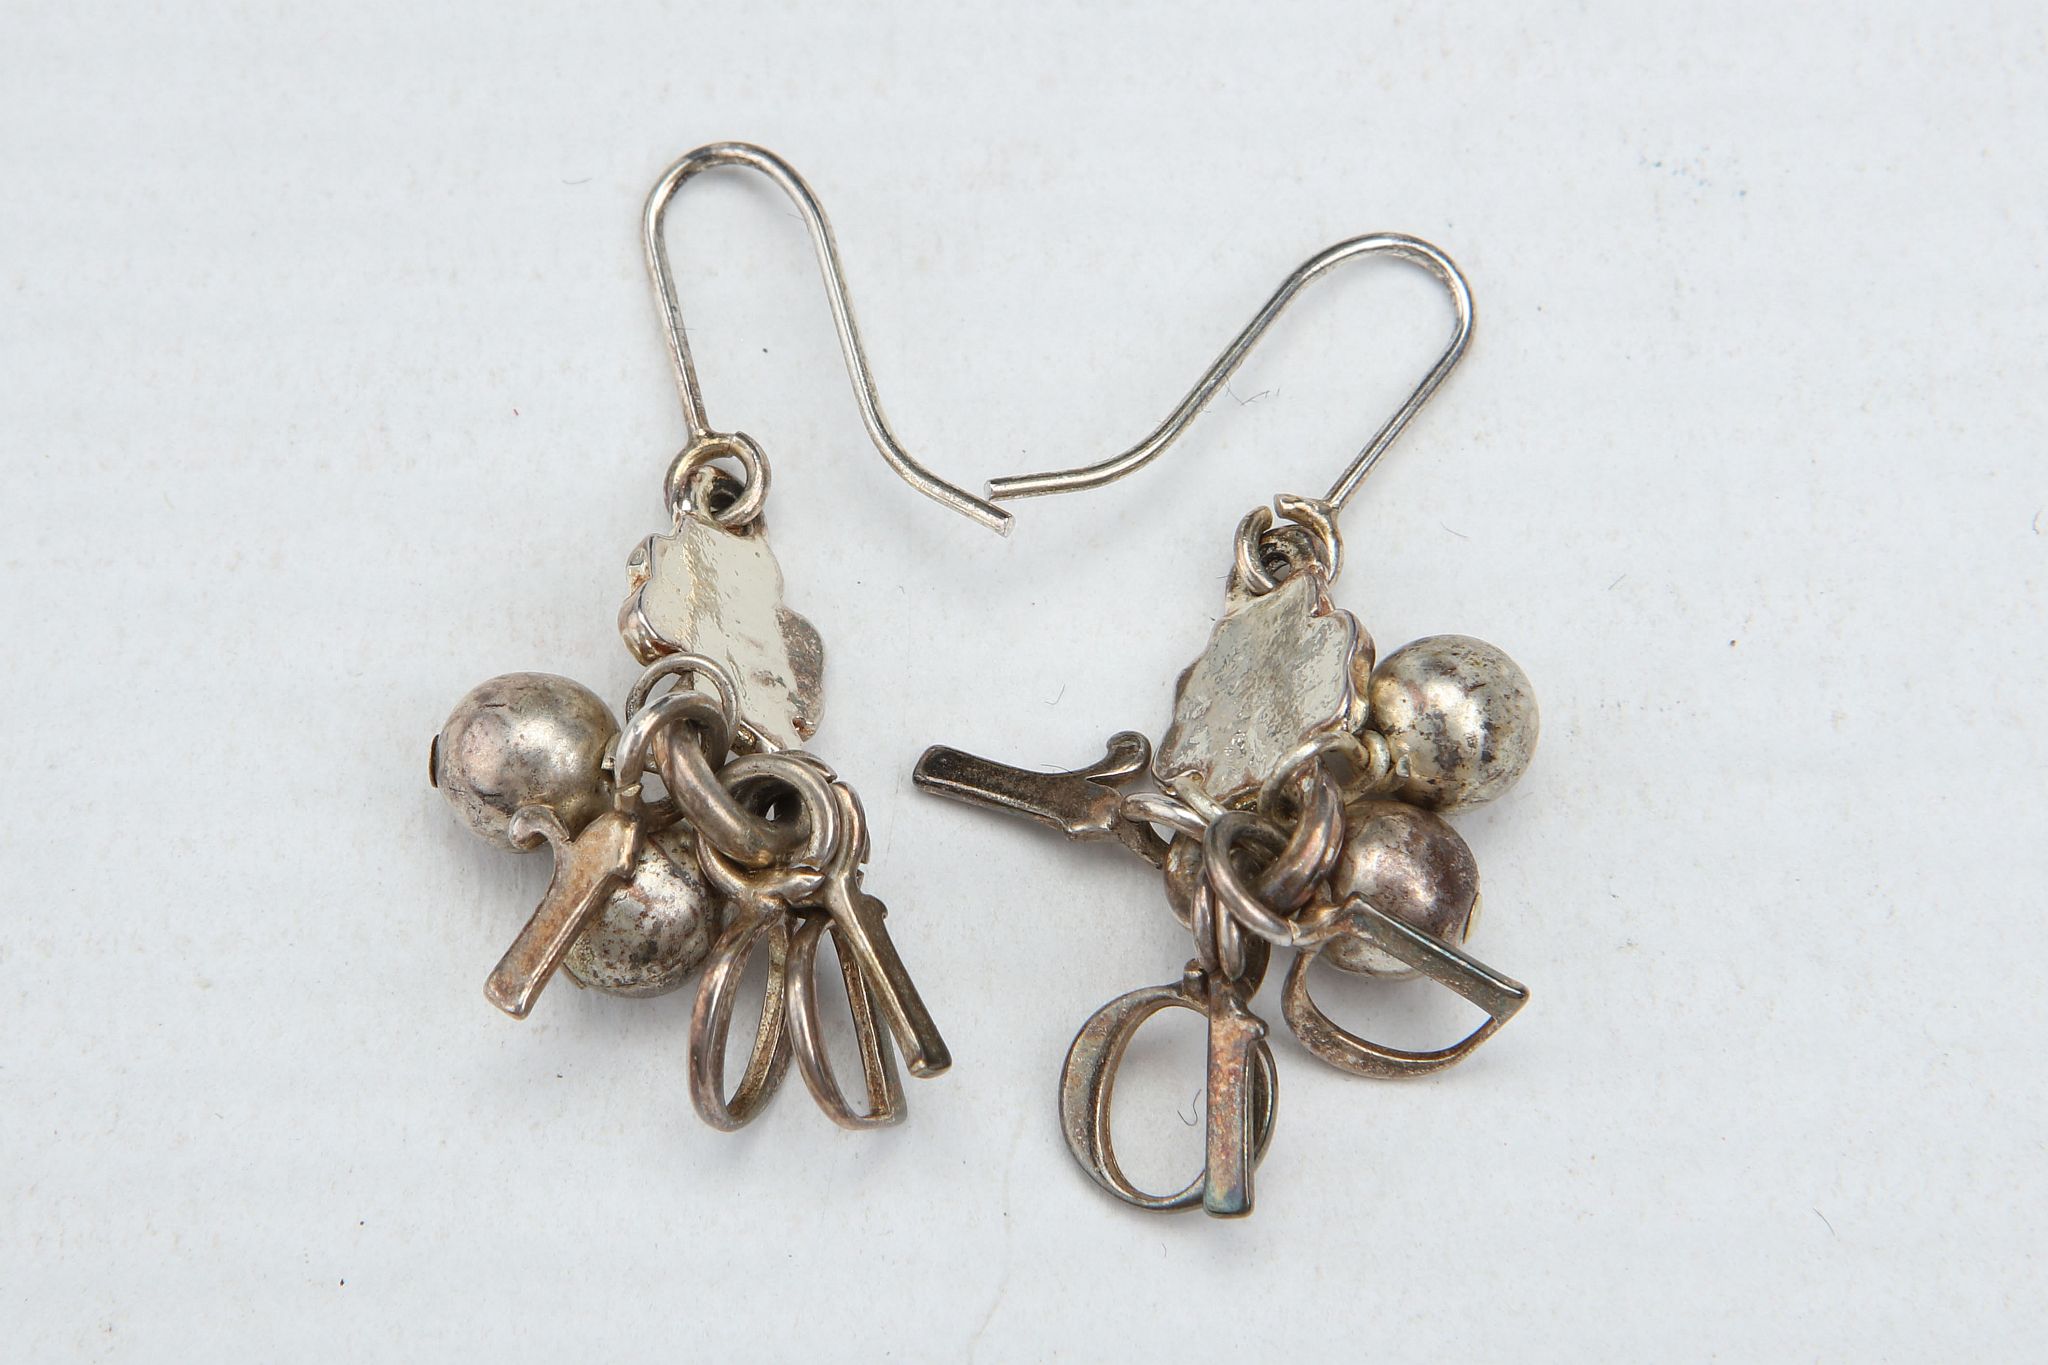 CHRISTIAN DIOR EARRINGS, silver tone with DIOR and flower charm, with box - Image 2 of 2